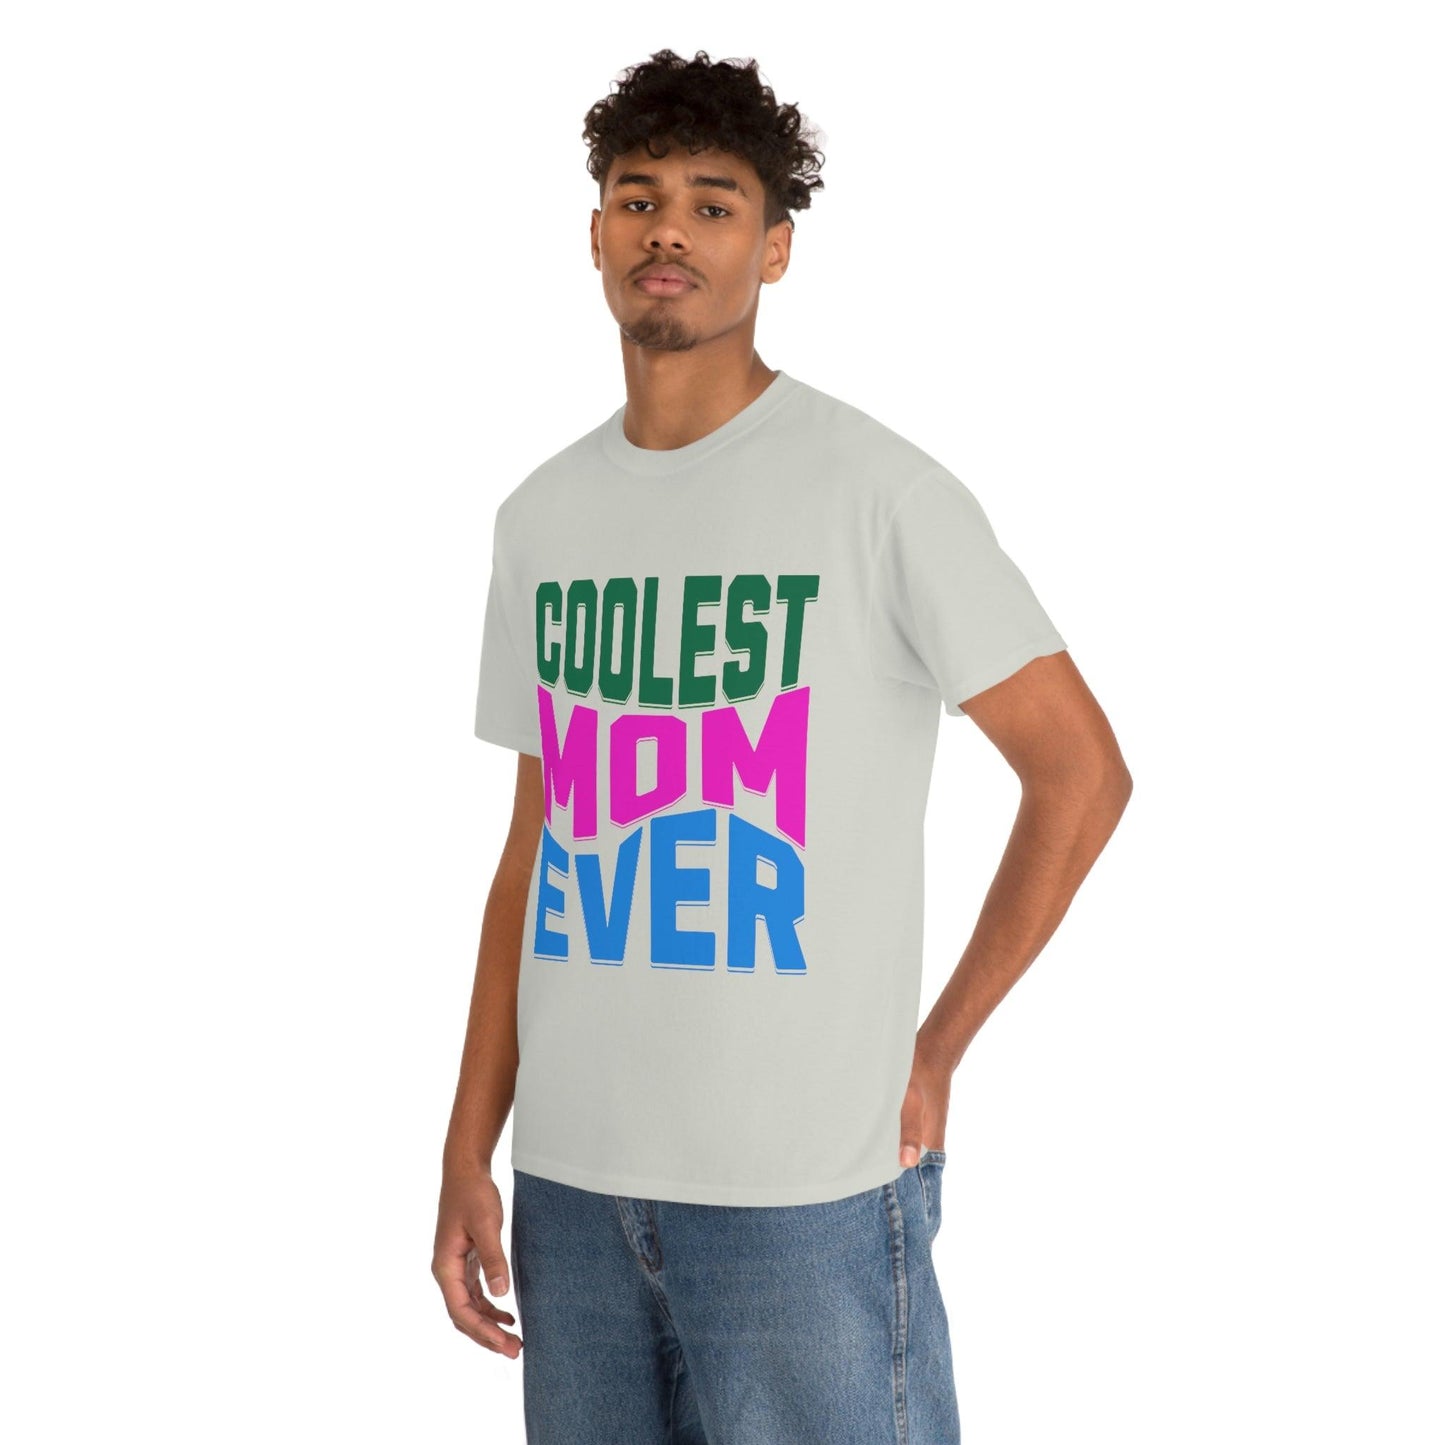 Coolest Mom Ever Tee